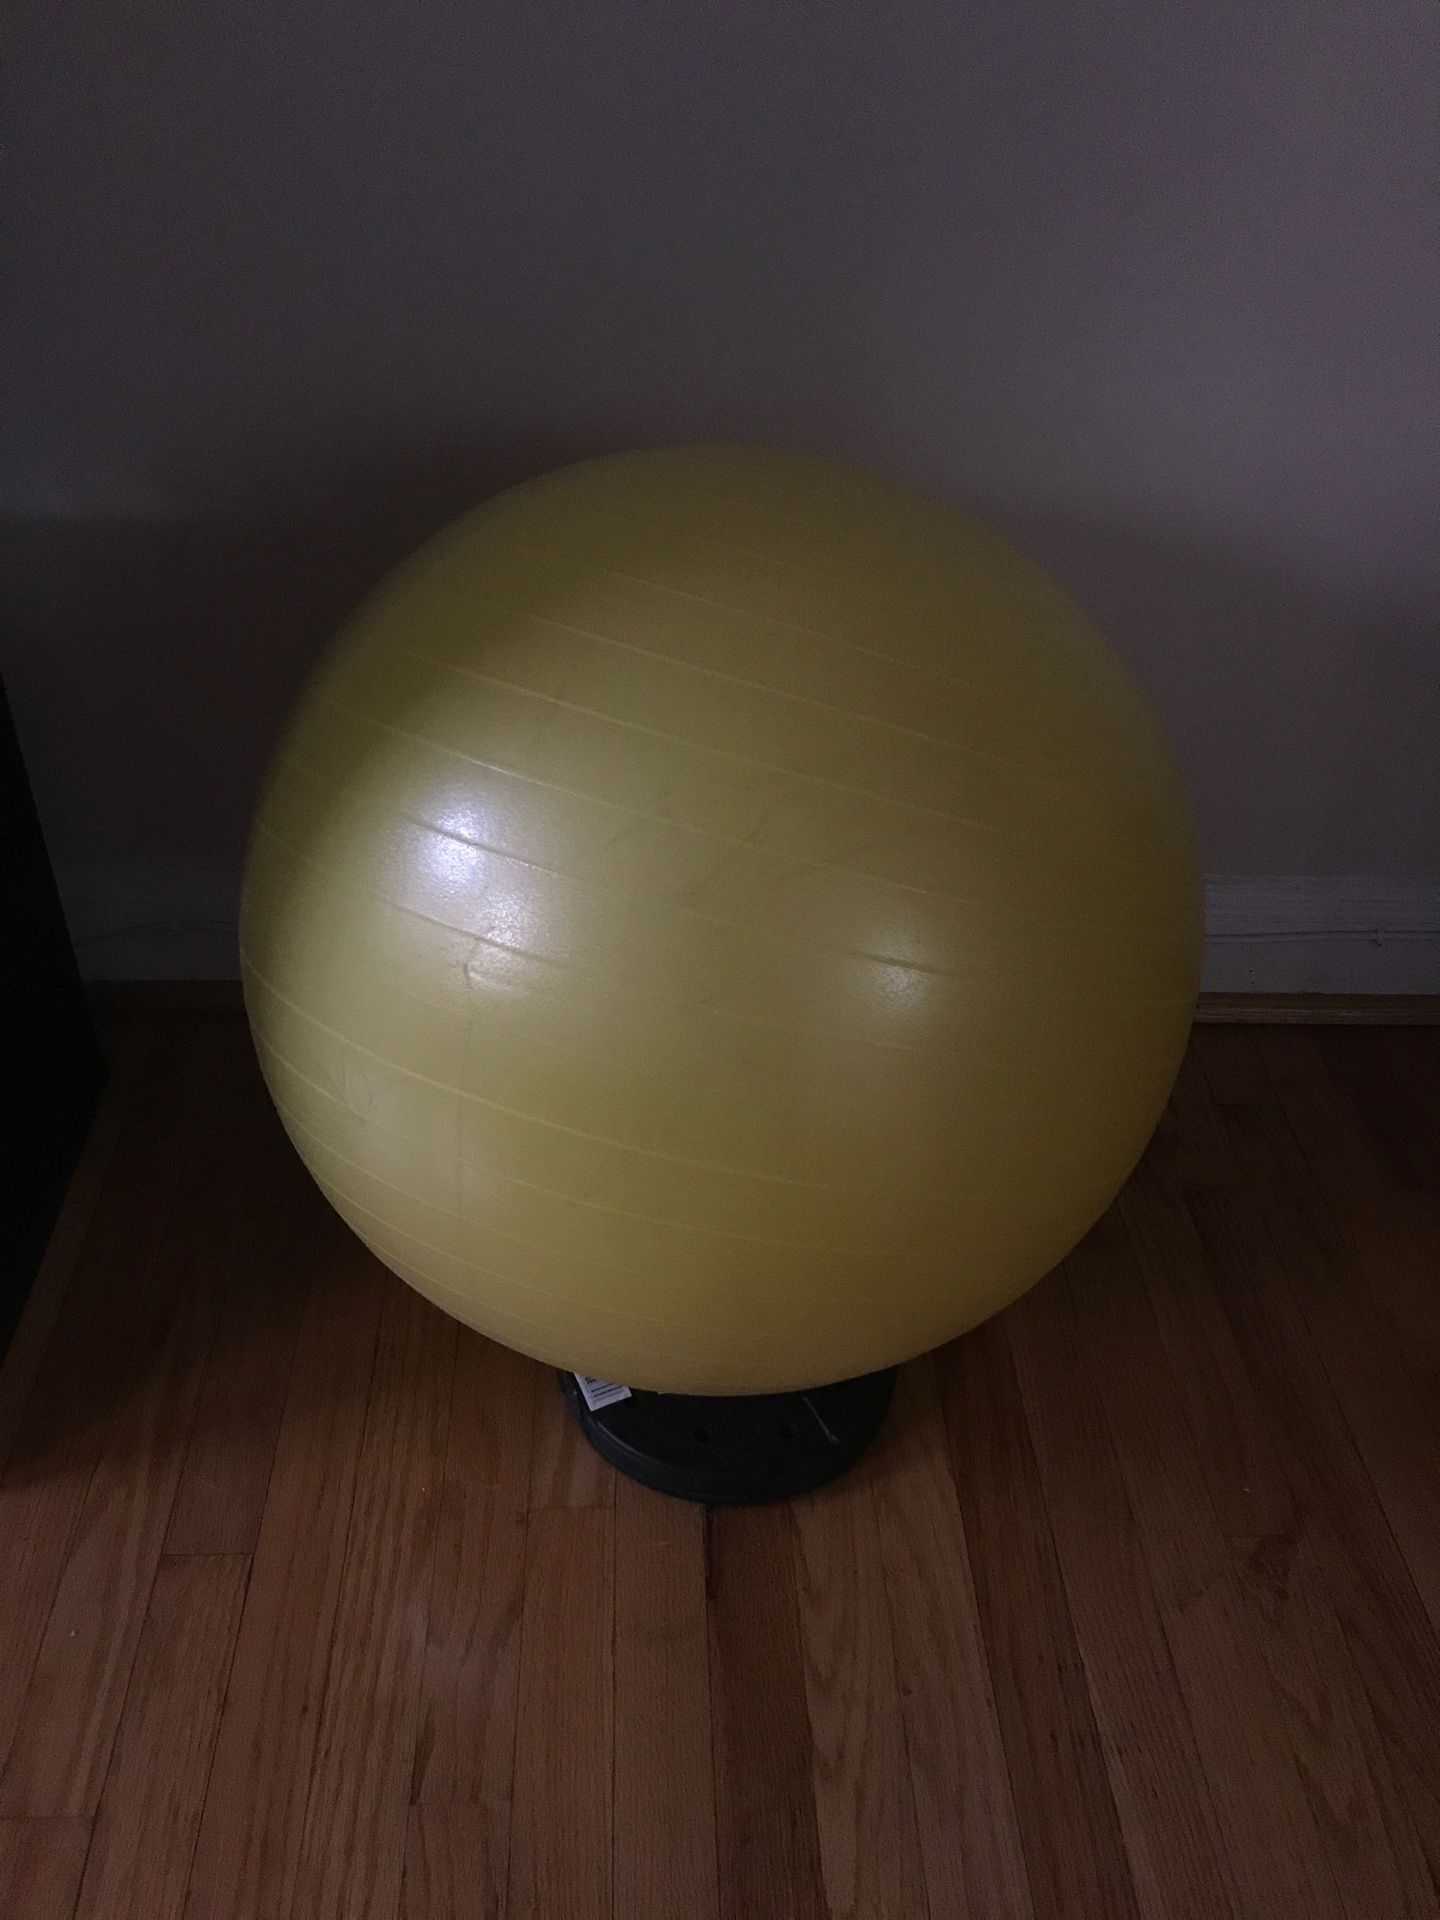 Exercise & Stability Ball